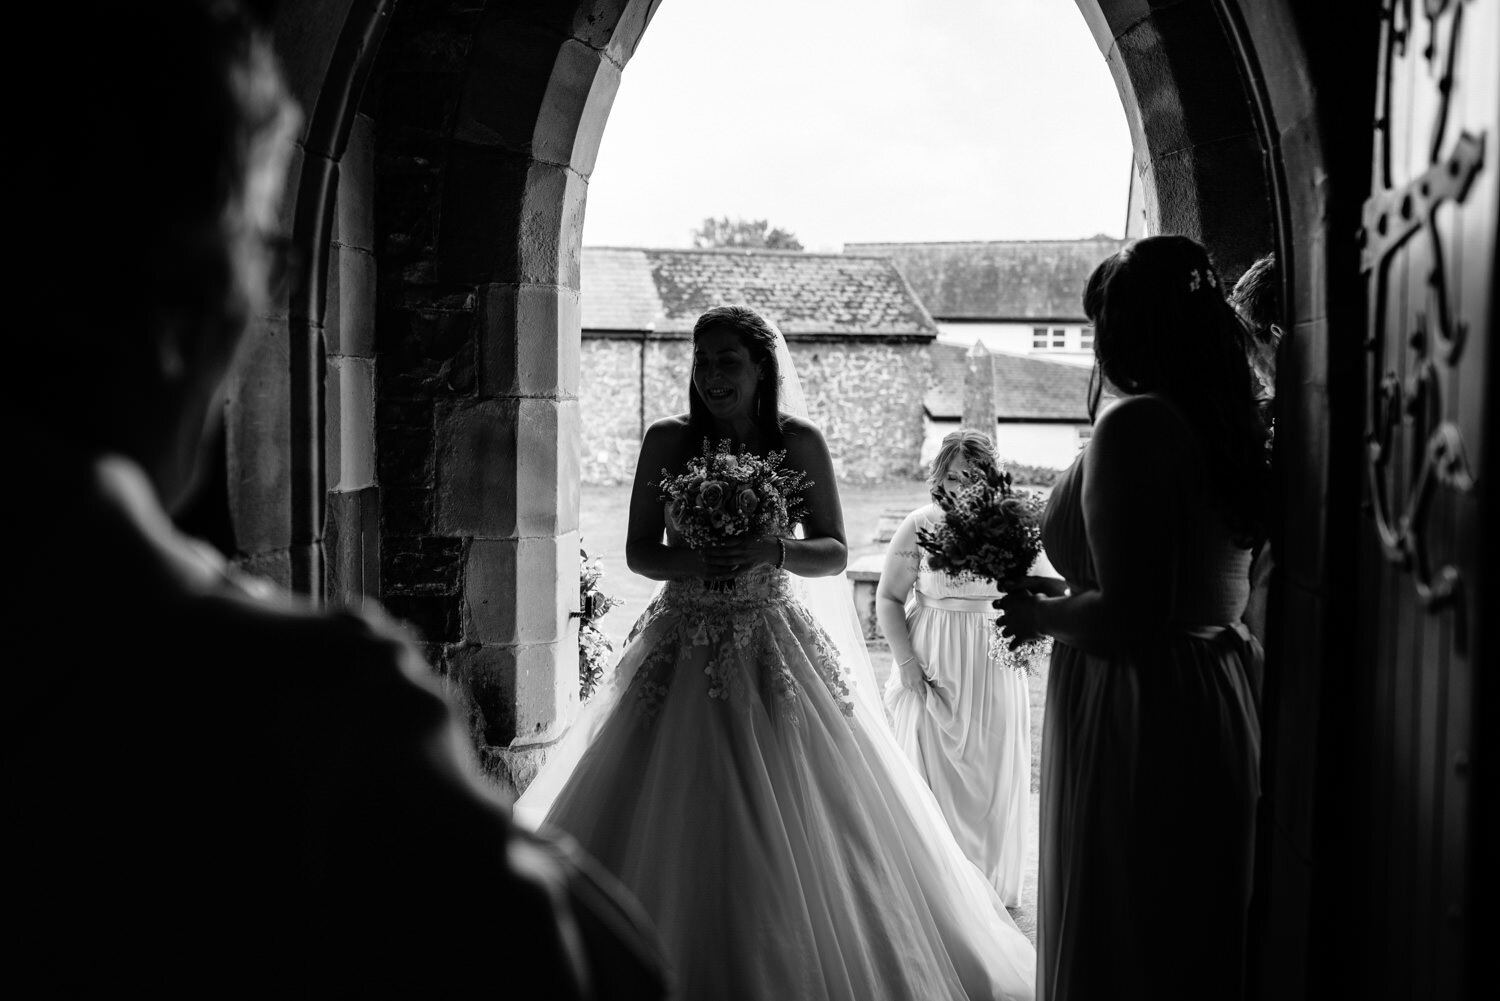 Bride in entrance to church